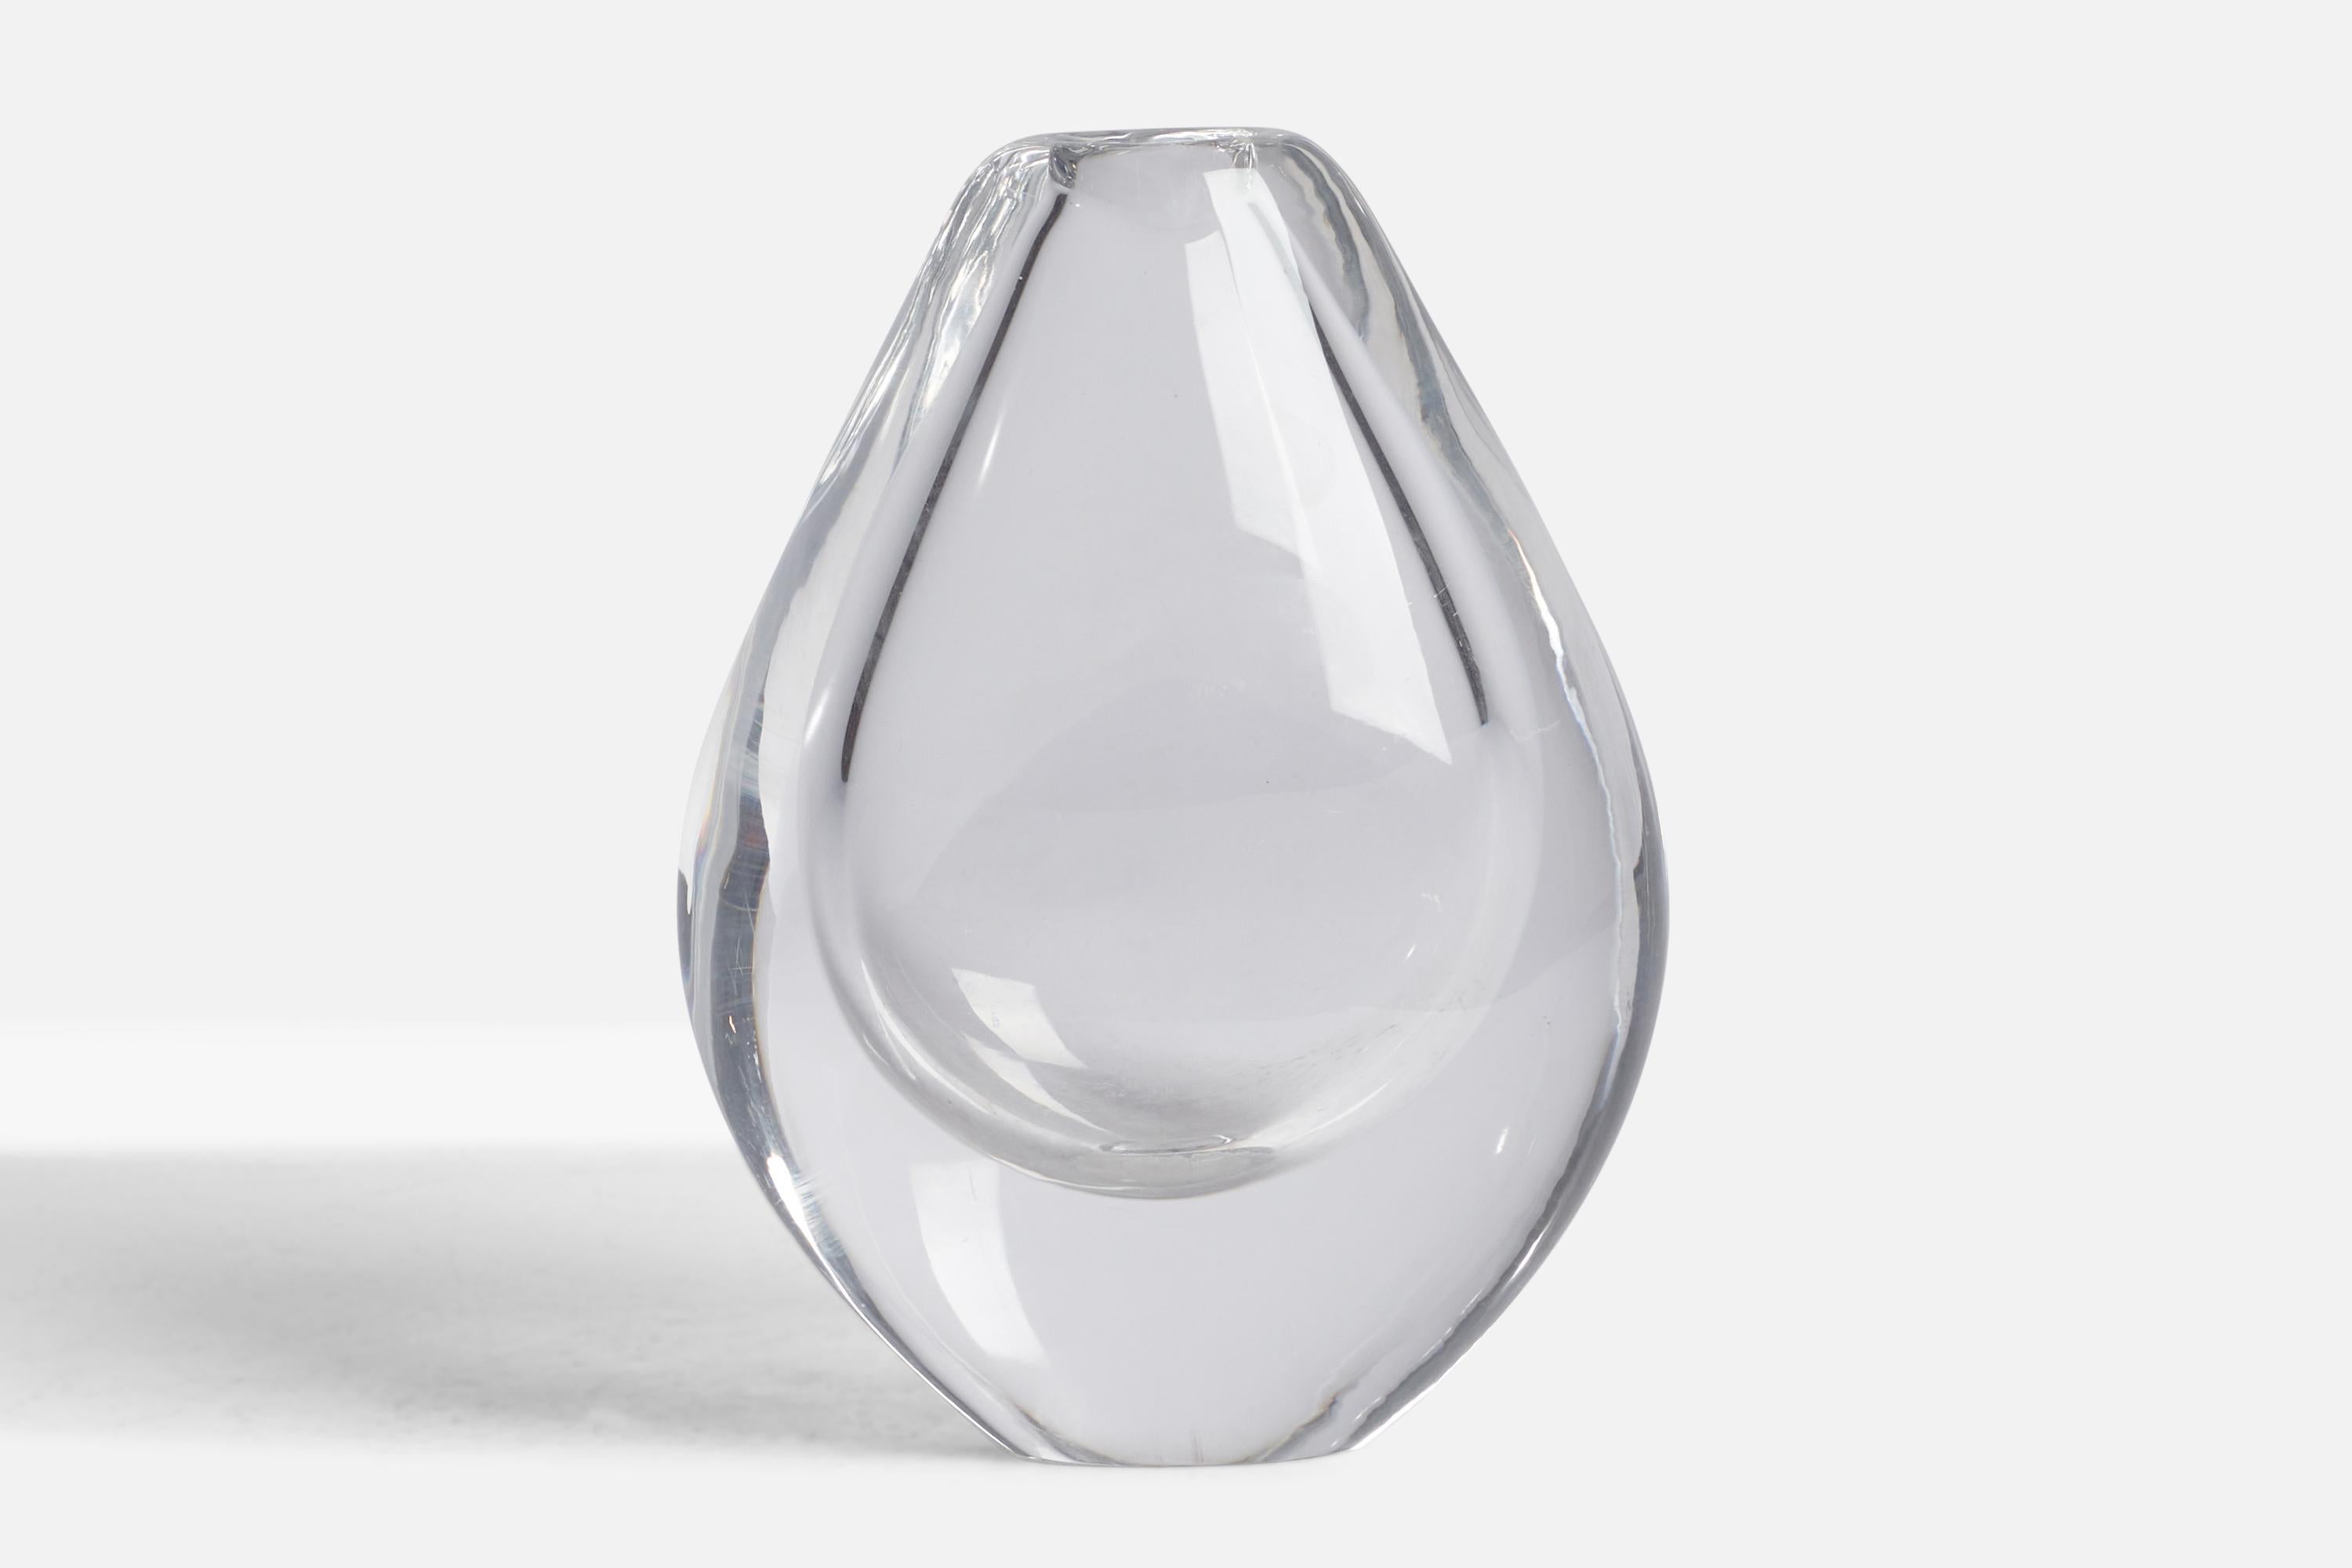 A blown-glass vase designed by Sven Palmqvist and produced by Orrefors, Sweden, c. 1950s.